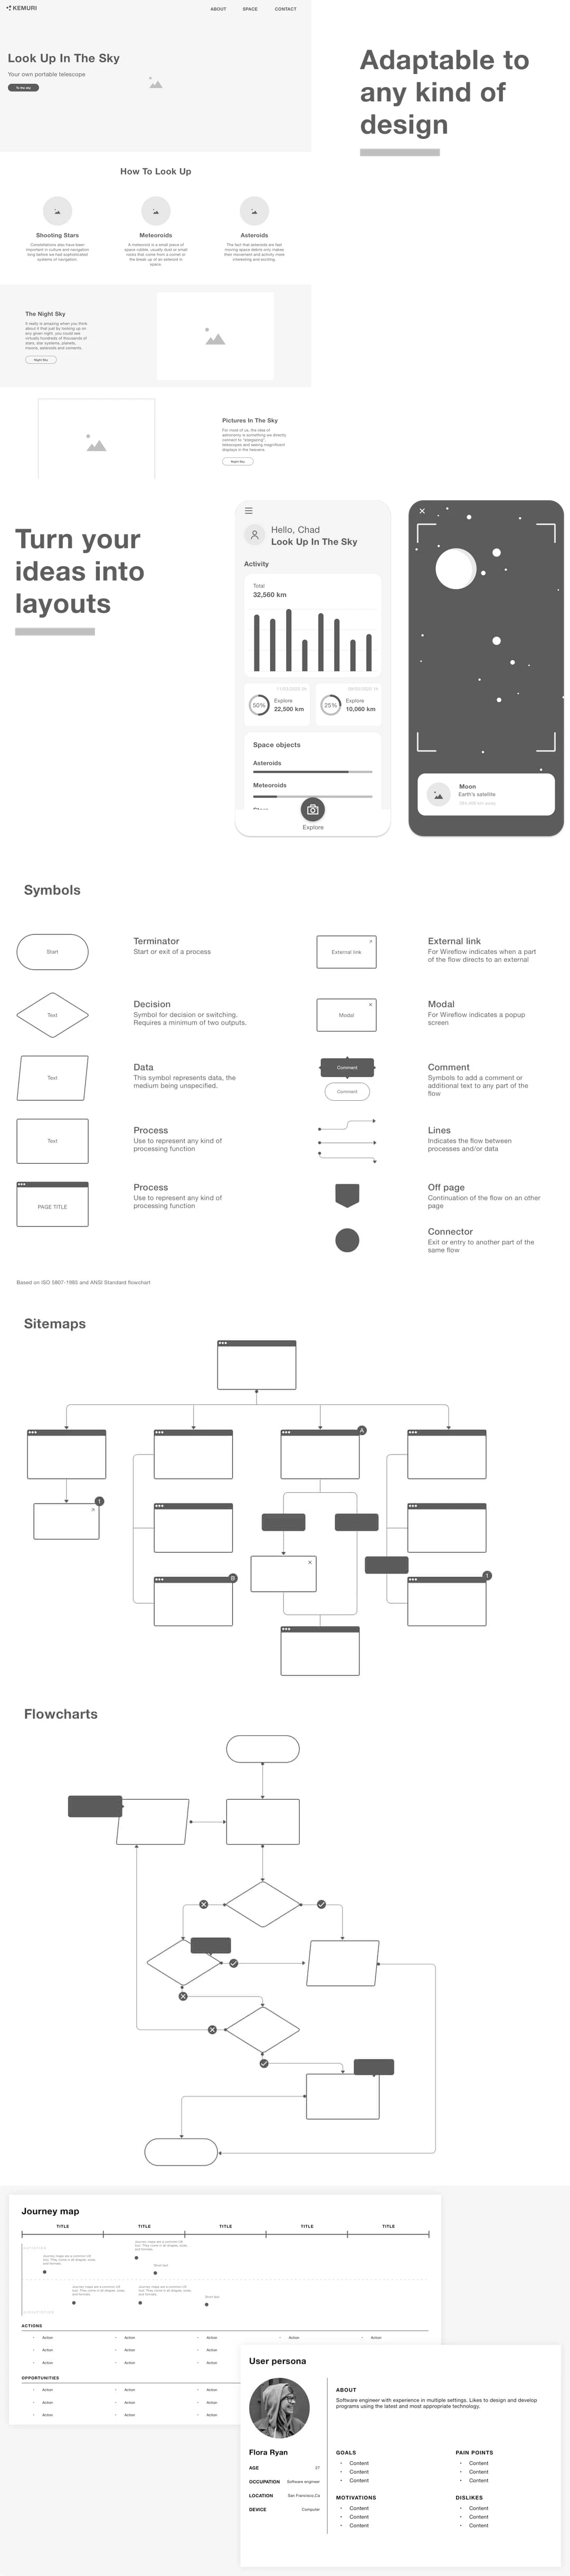 Kemuri Wireframe Ui Kit - This project came out of the need to optimize my design process within my team in Oracle. At that time, I was trying different tools and wireframe kits that were not entirely optimal for the translation to mockups. Afterward, I decided to create this wireframe kit based on the design system I was working at the time and use it in other projects as well. Since its construction was based on atomic design, this kit turned out to be very flexible for the customization and creation of different components, of which I decided to share an improved version, along with a user flow kit and some other templates, placing everything in a single project.